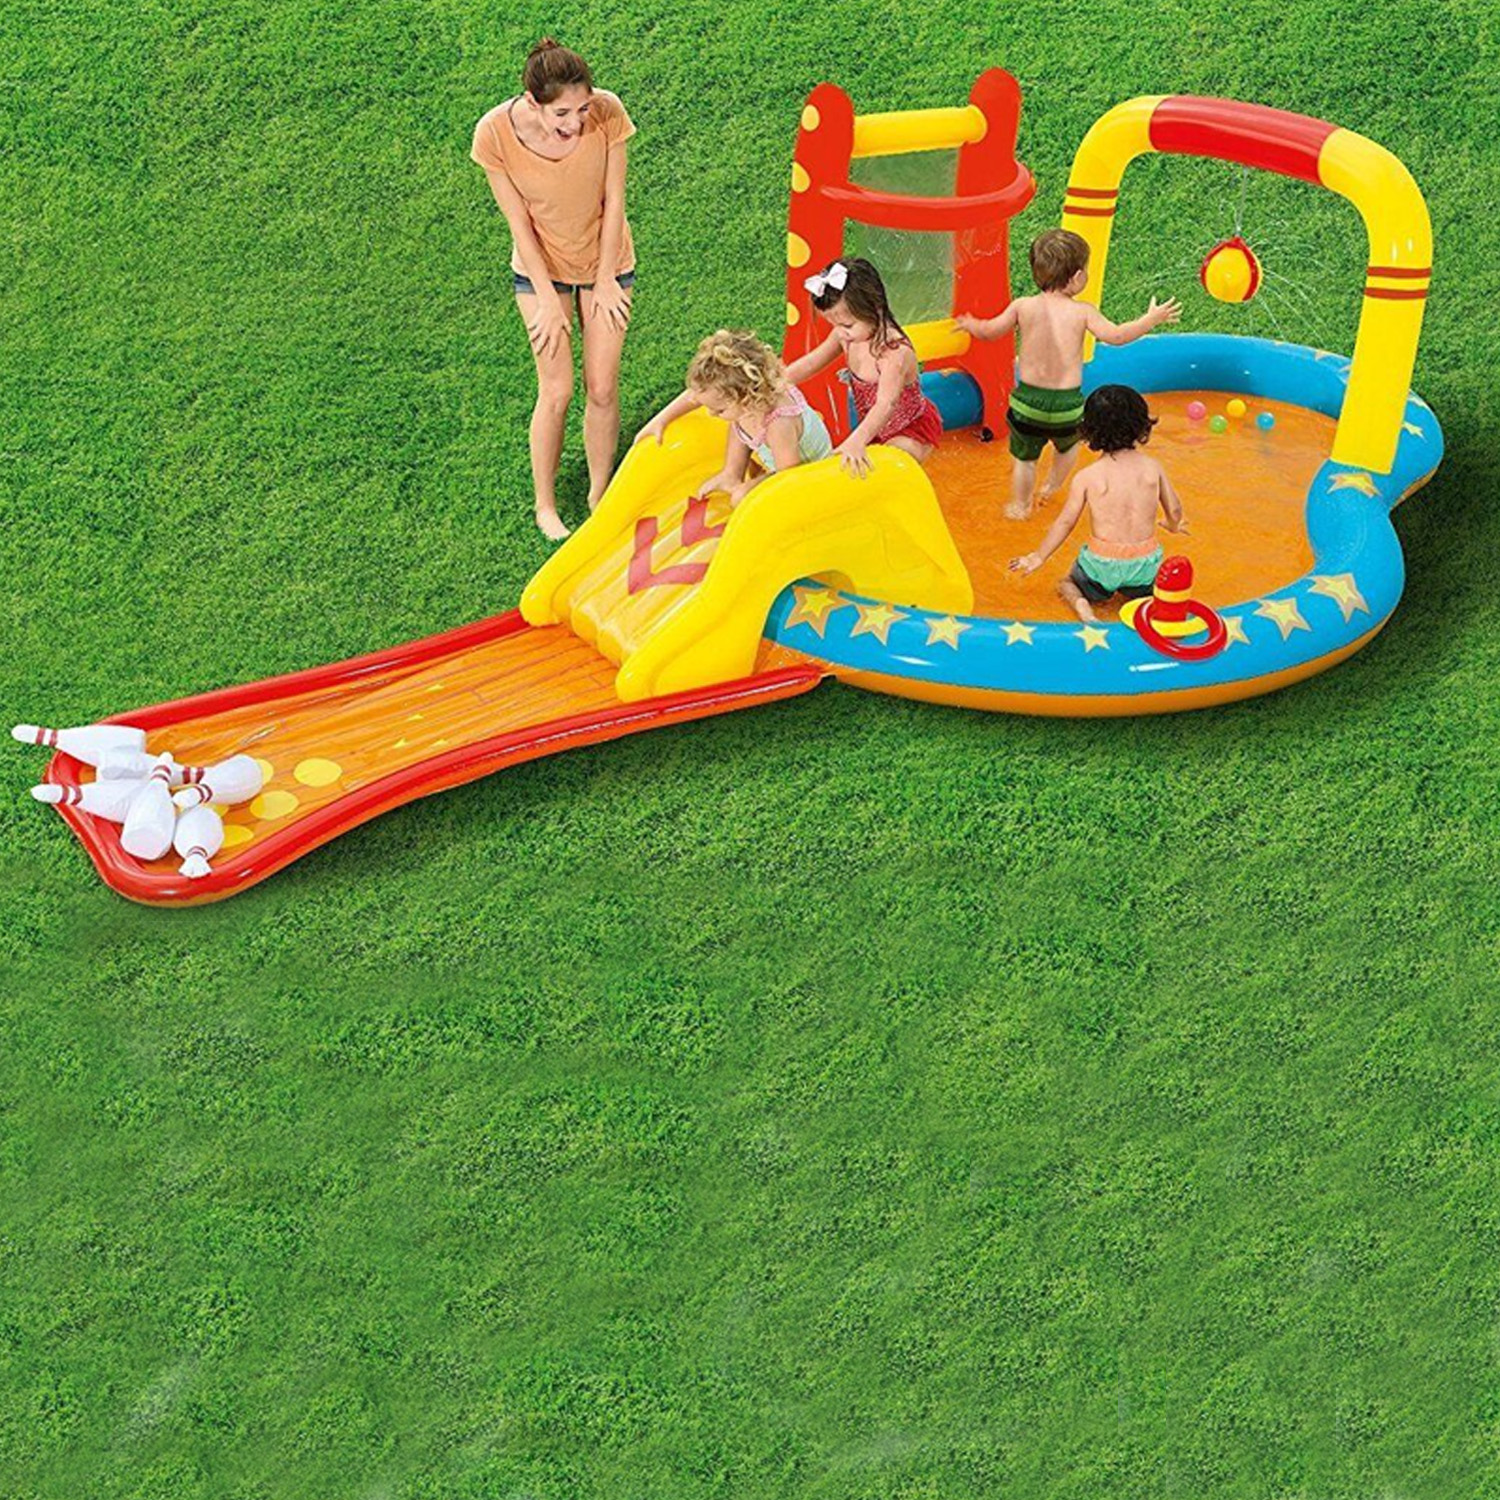 2 x New in Box BESTWAY Kids Lil' Champ play Centre Paddling Pool  with Slide RRP £69.99 each       Ref (C)  Box style 53068